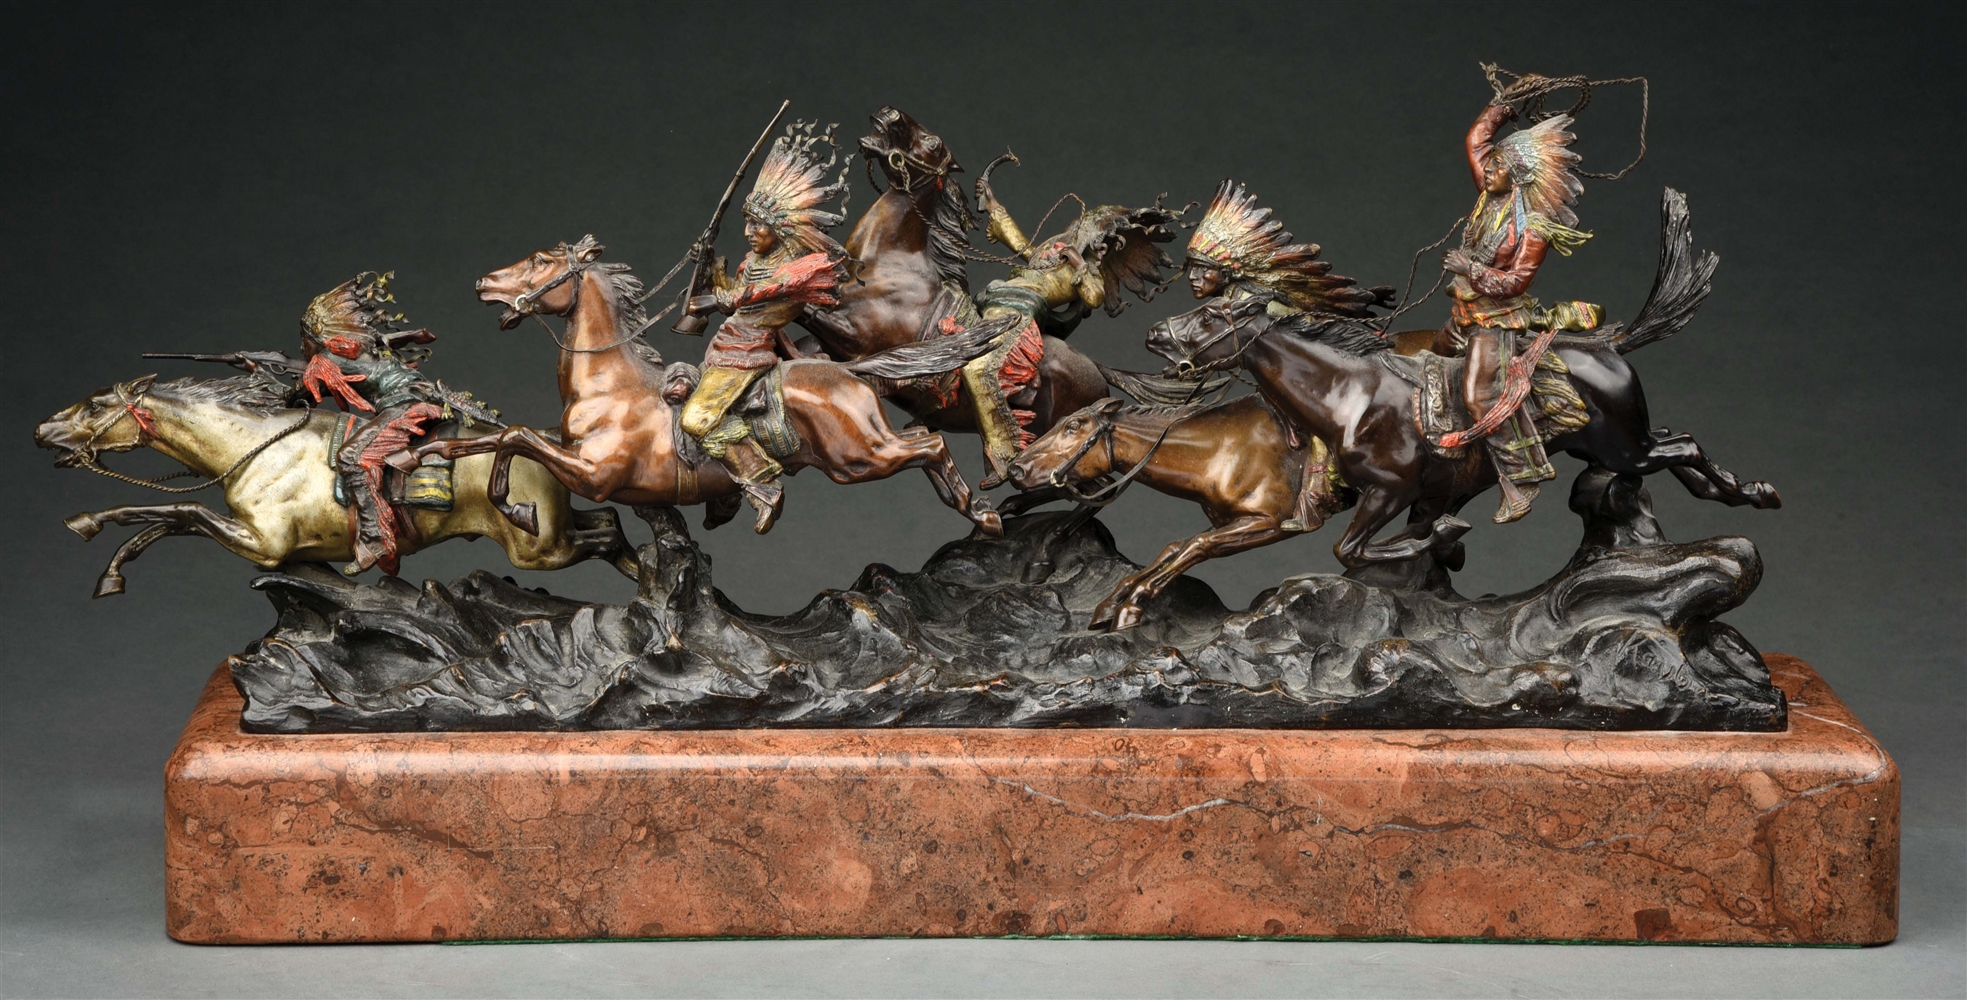 THE CHASE BRONZE SCULPTURE.